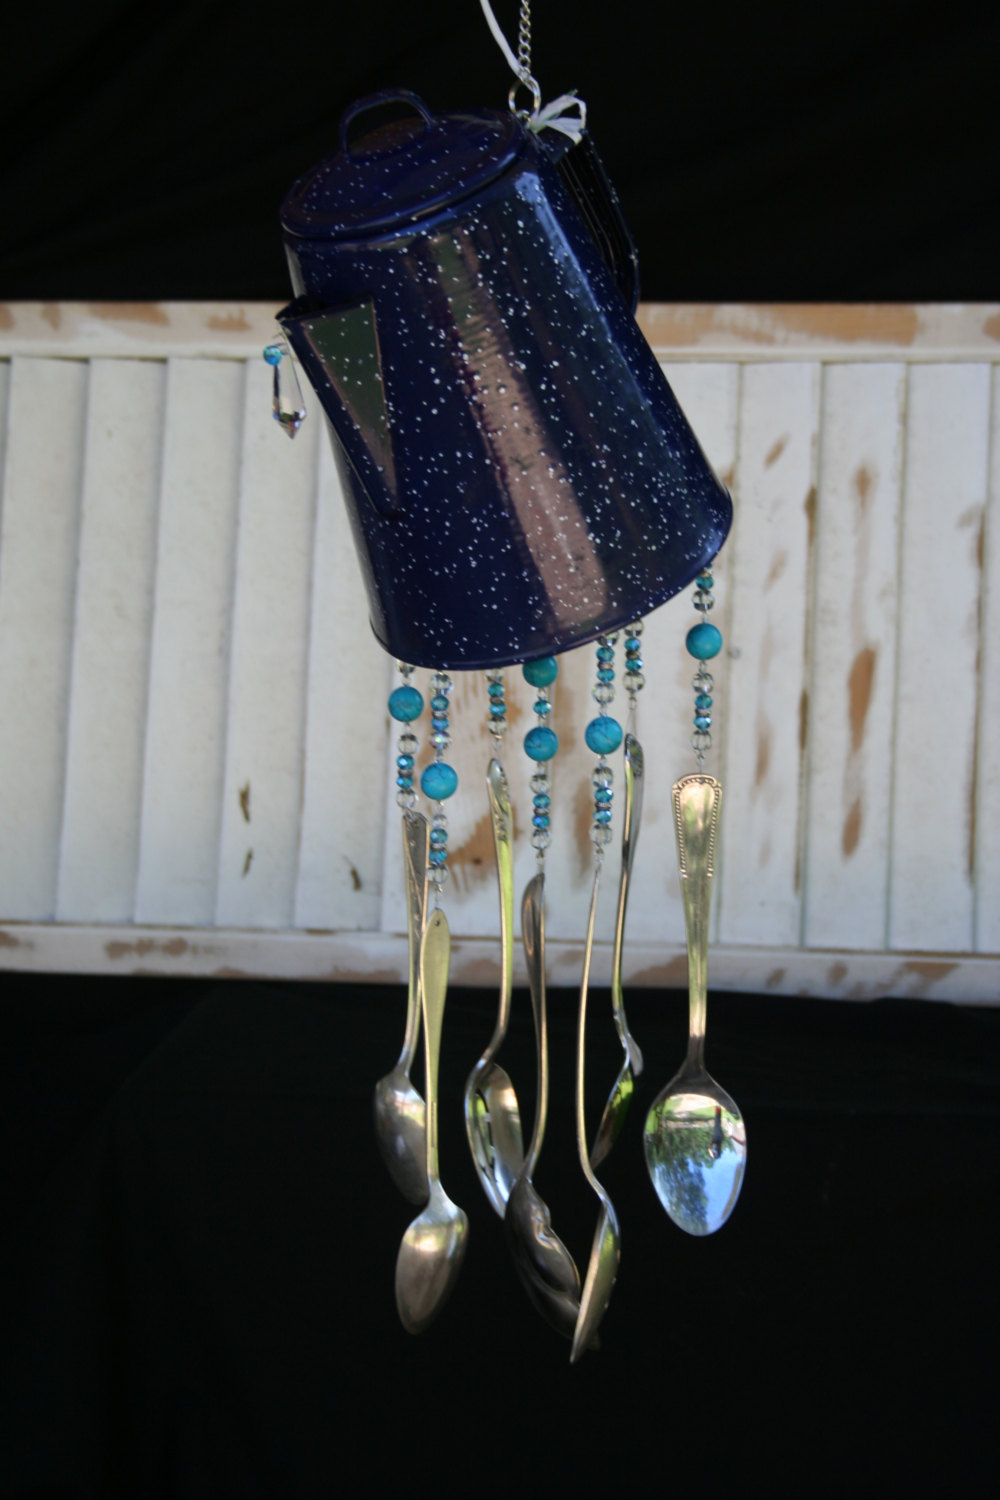 16 Wild Handmade Wind Chime Designs Your Garden Needs To Have Right Now